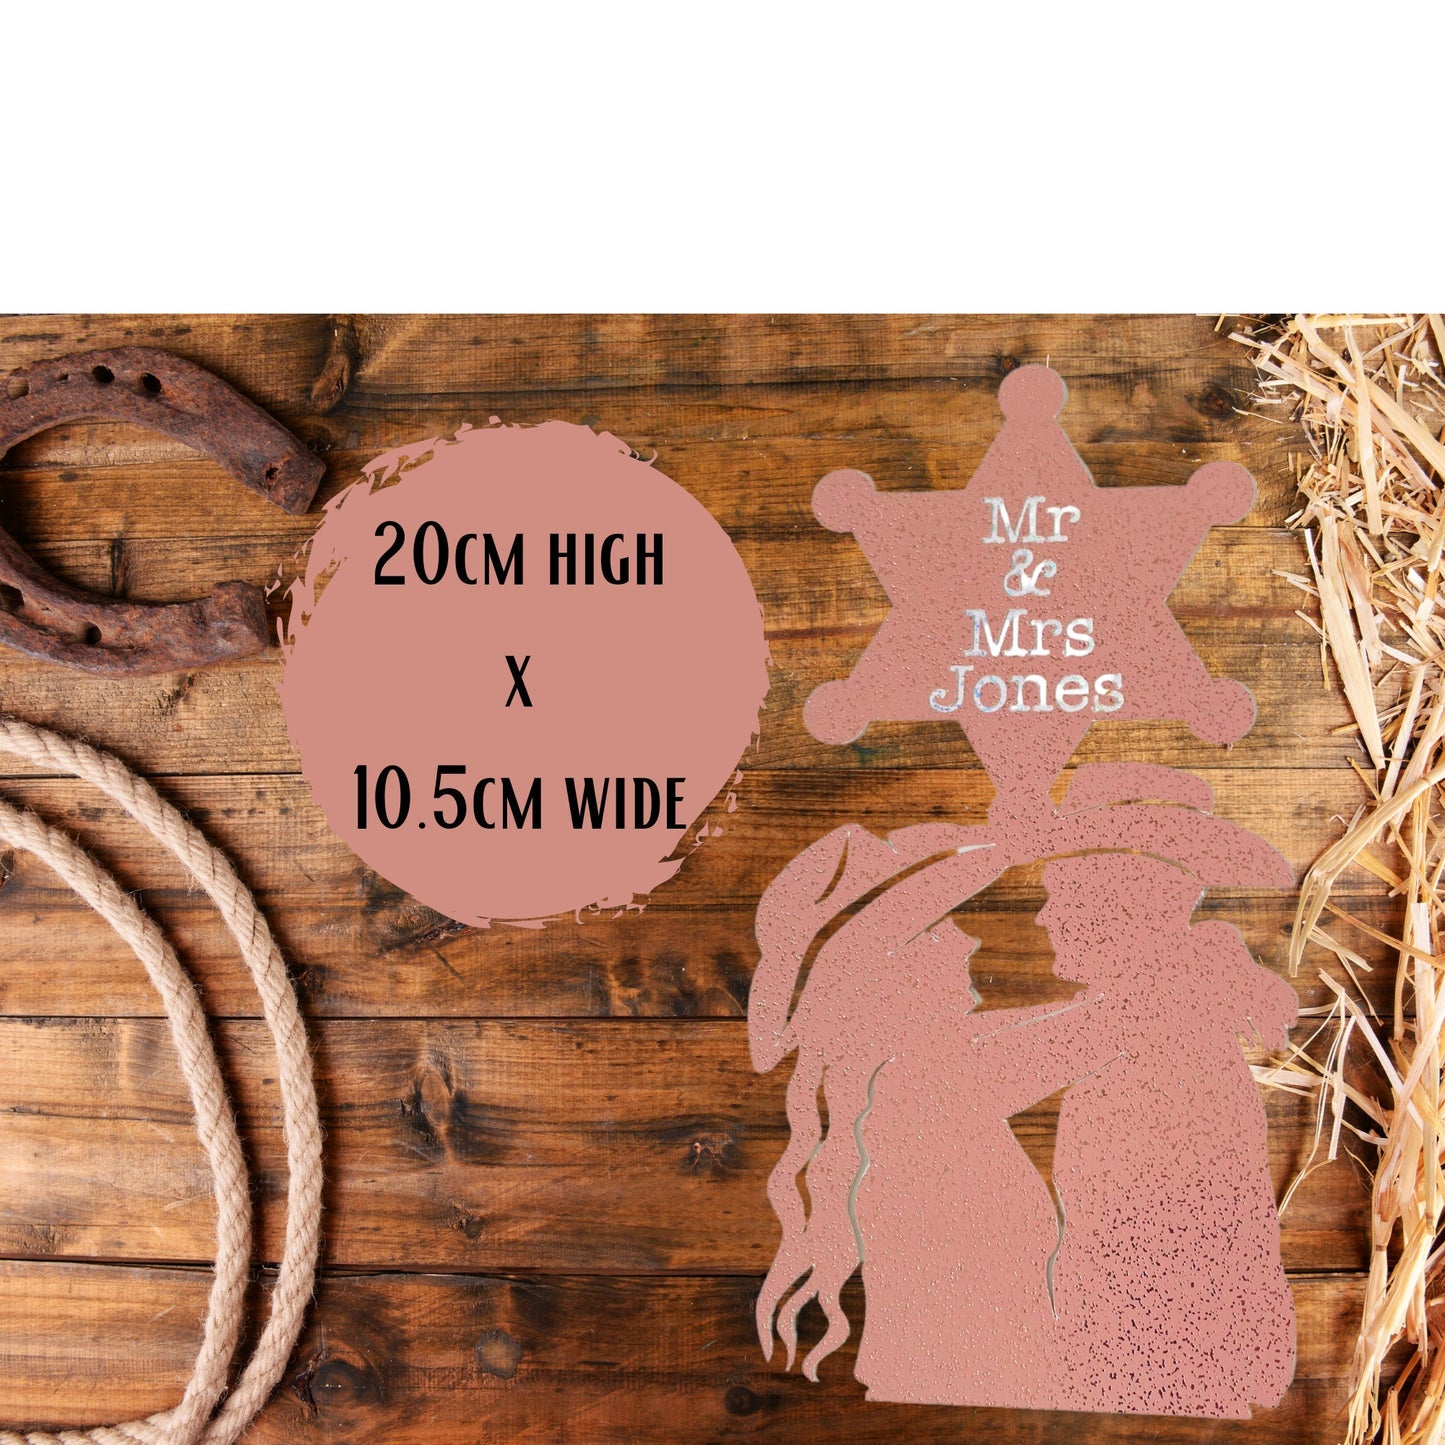 Western Wedding Cake Topper Blush Pink Personalised Boho Cake Topper Cowgirl Cowboy Stetson Hats for Bride and Grooms Wedding Cake Topper